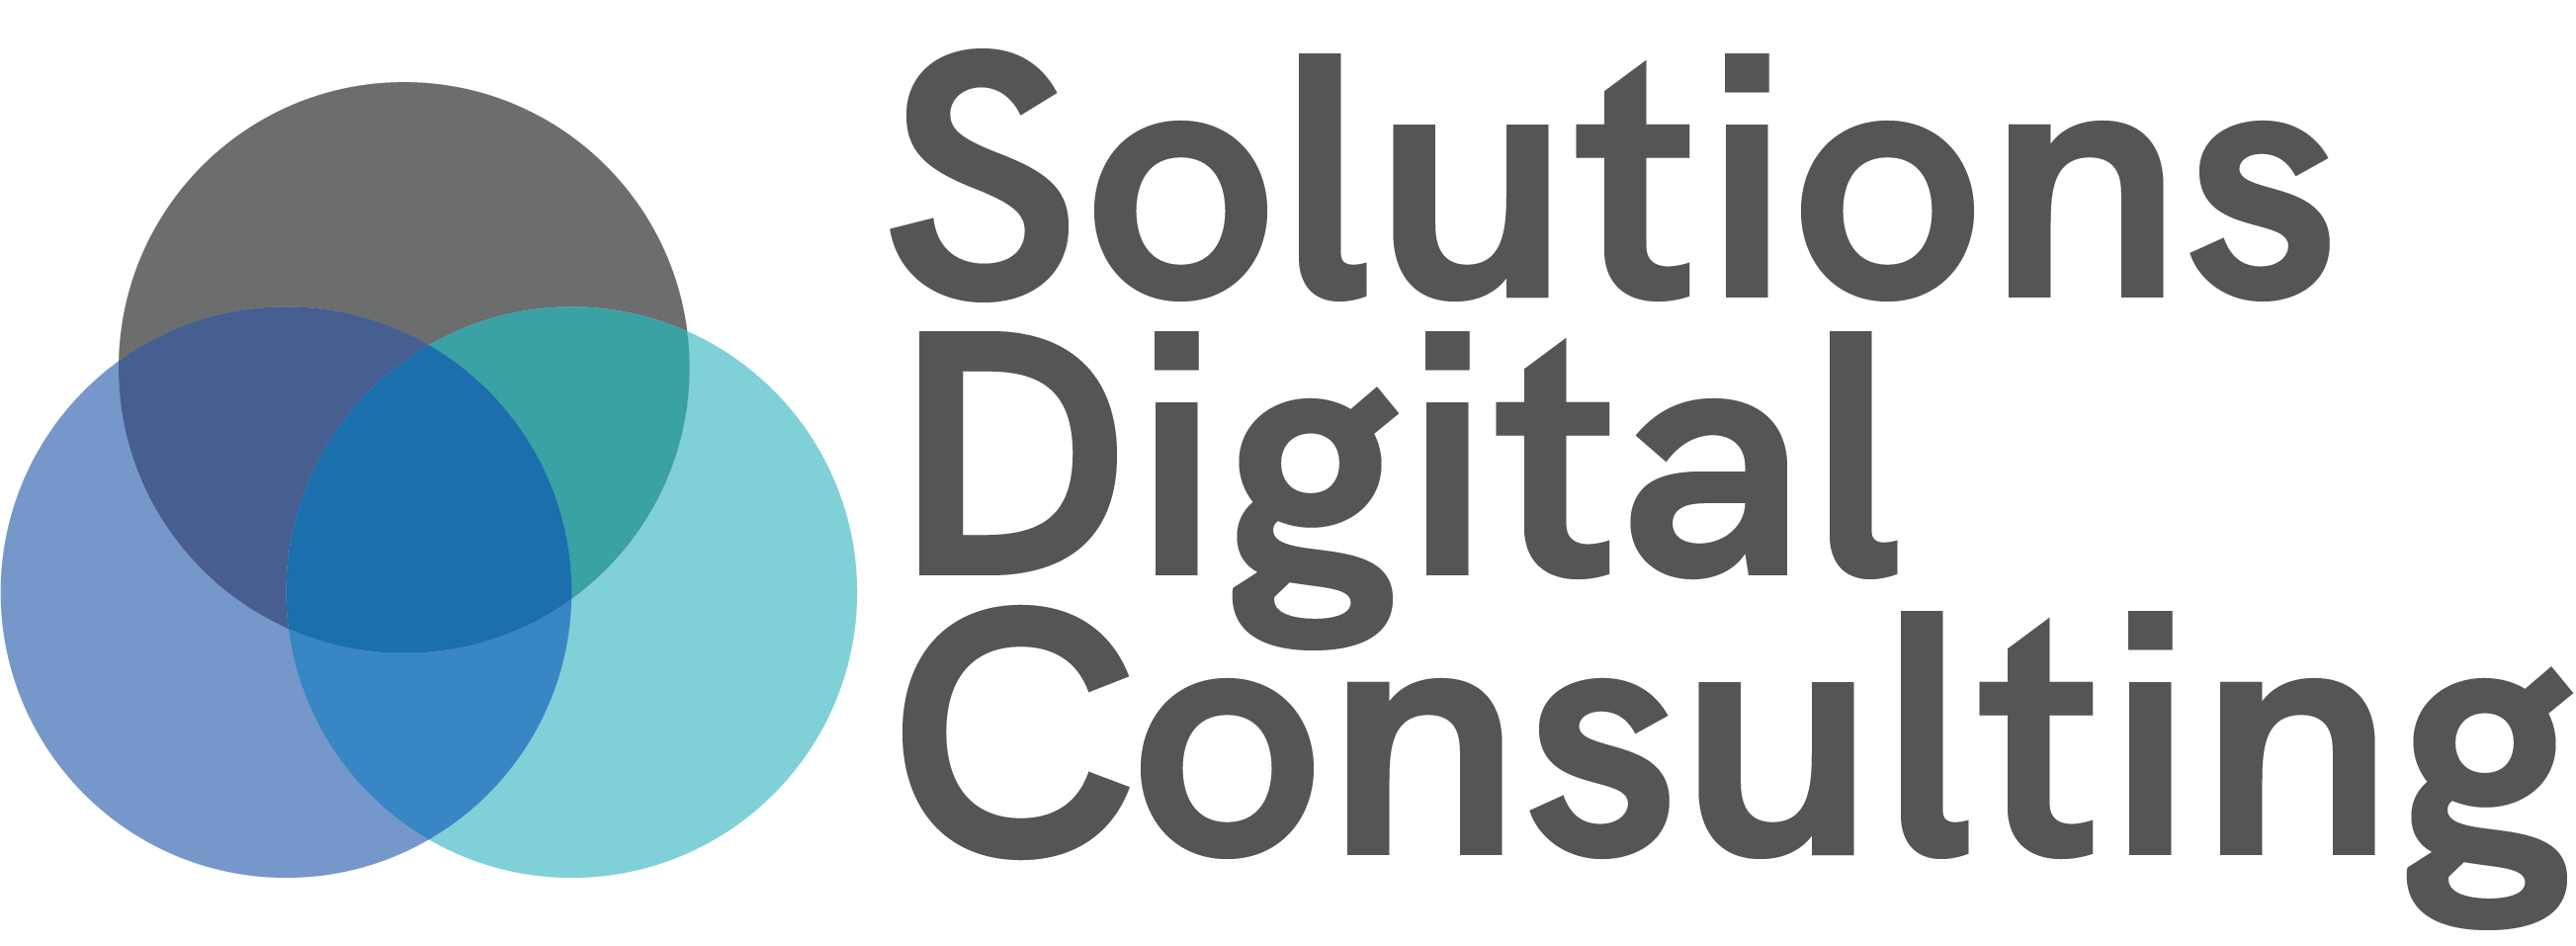 Solutions Digital Consulting